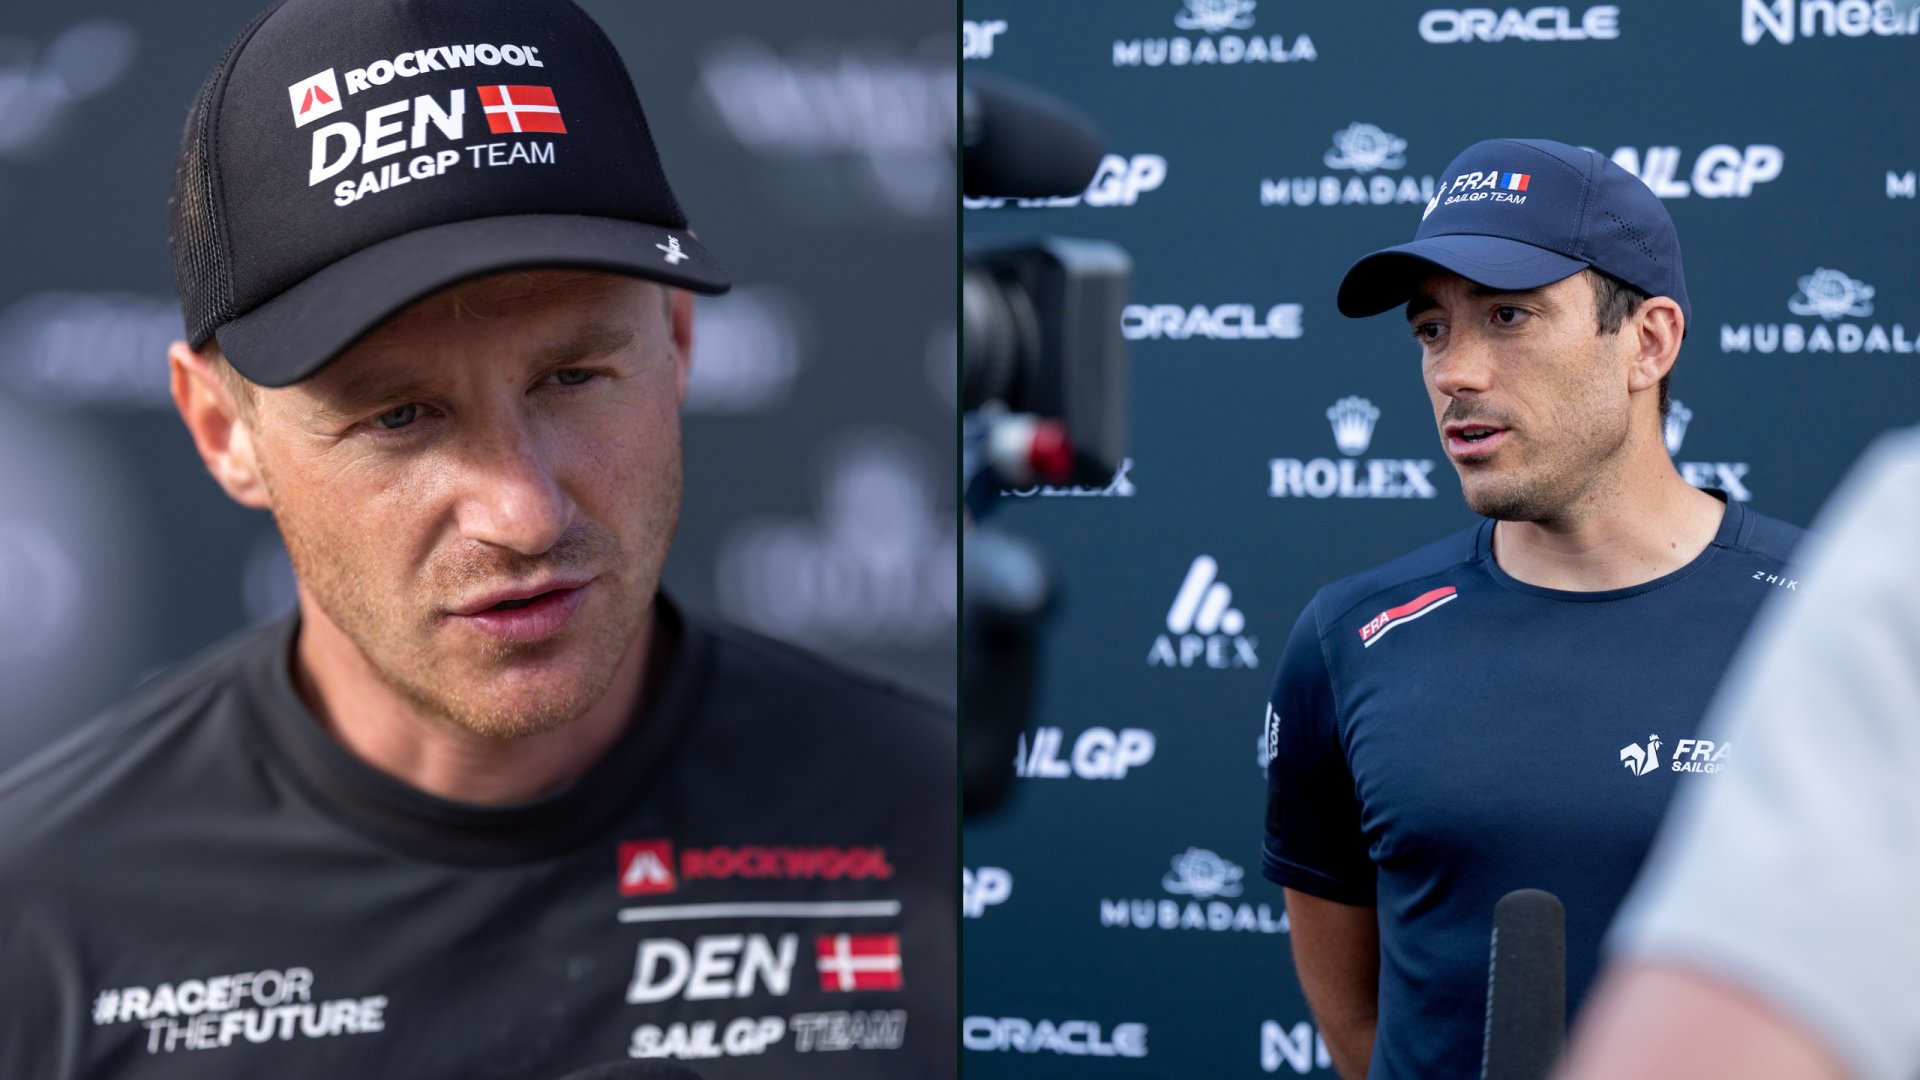 Sehested says Grand Final qualification is ‘almost impossible’; Delapierre remains ‘confident’